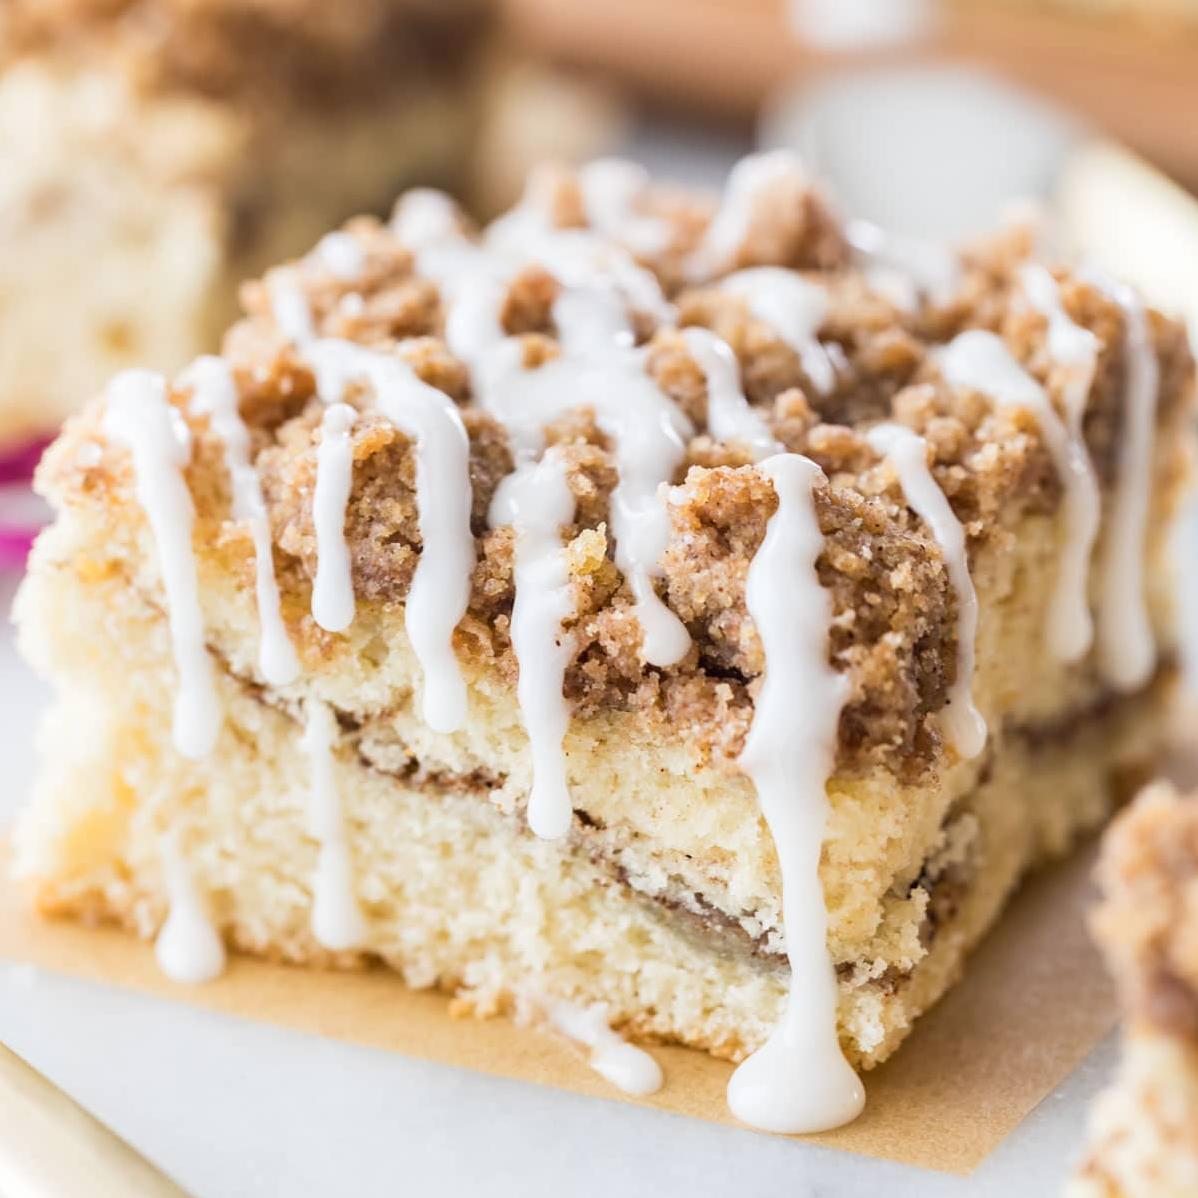  This delicious coffee cake will make your taste buds dance with joy.